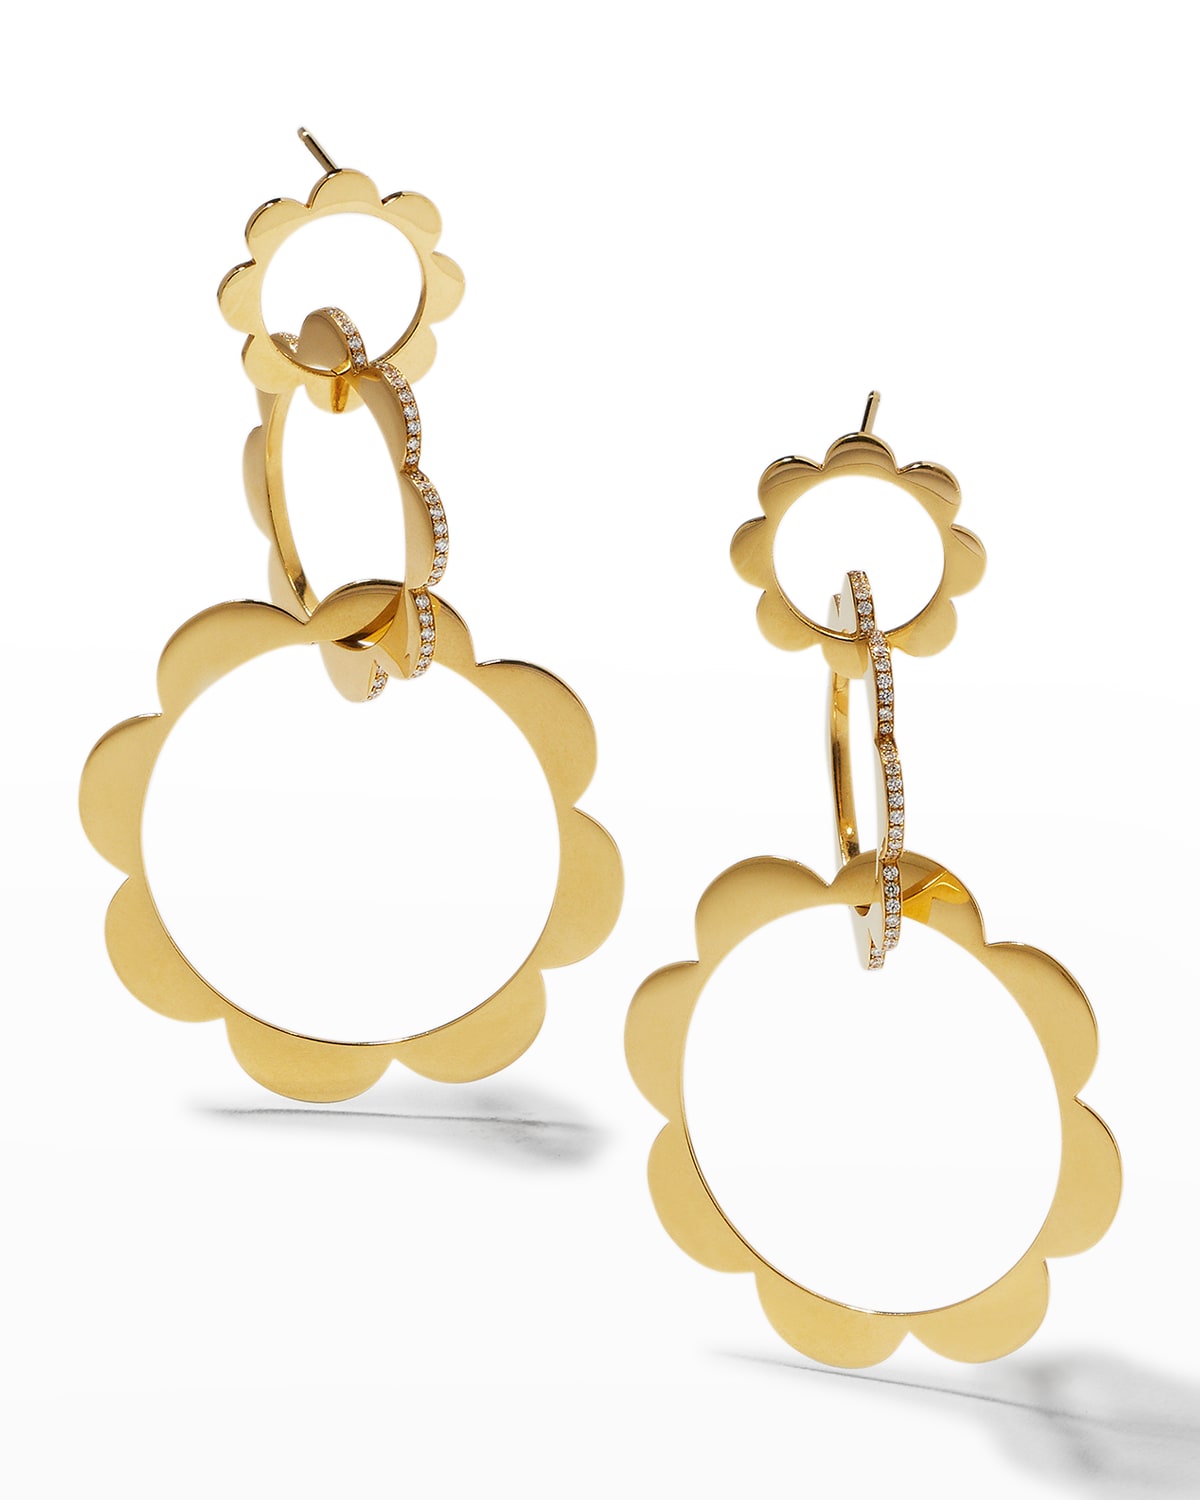 CADAR Trio Unity Earrings with Diamonds and 18k Gold